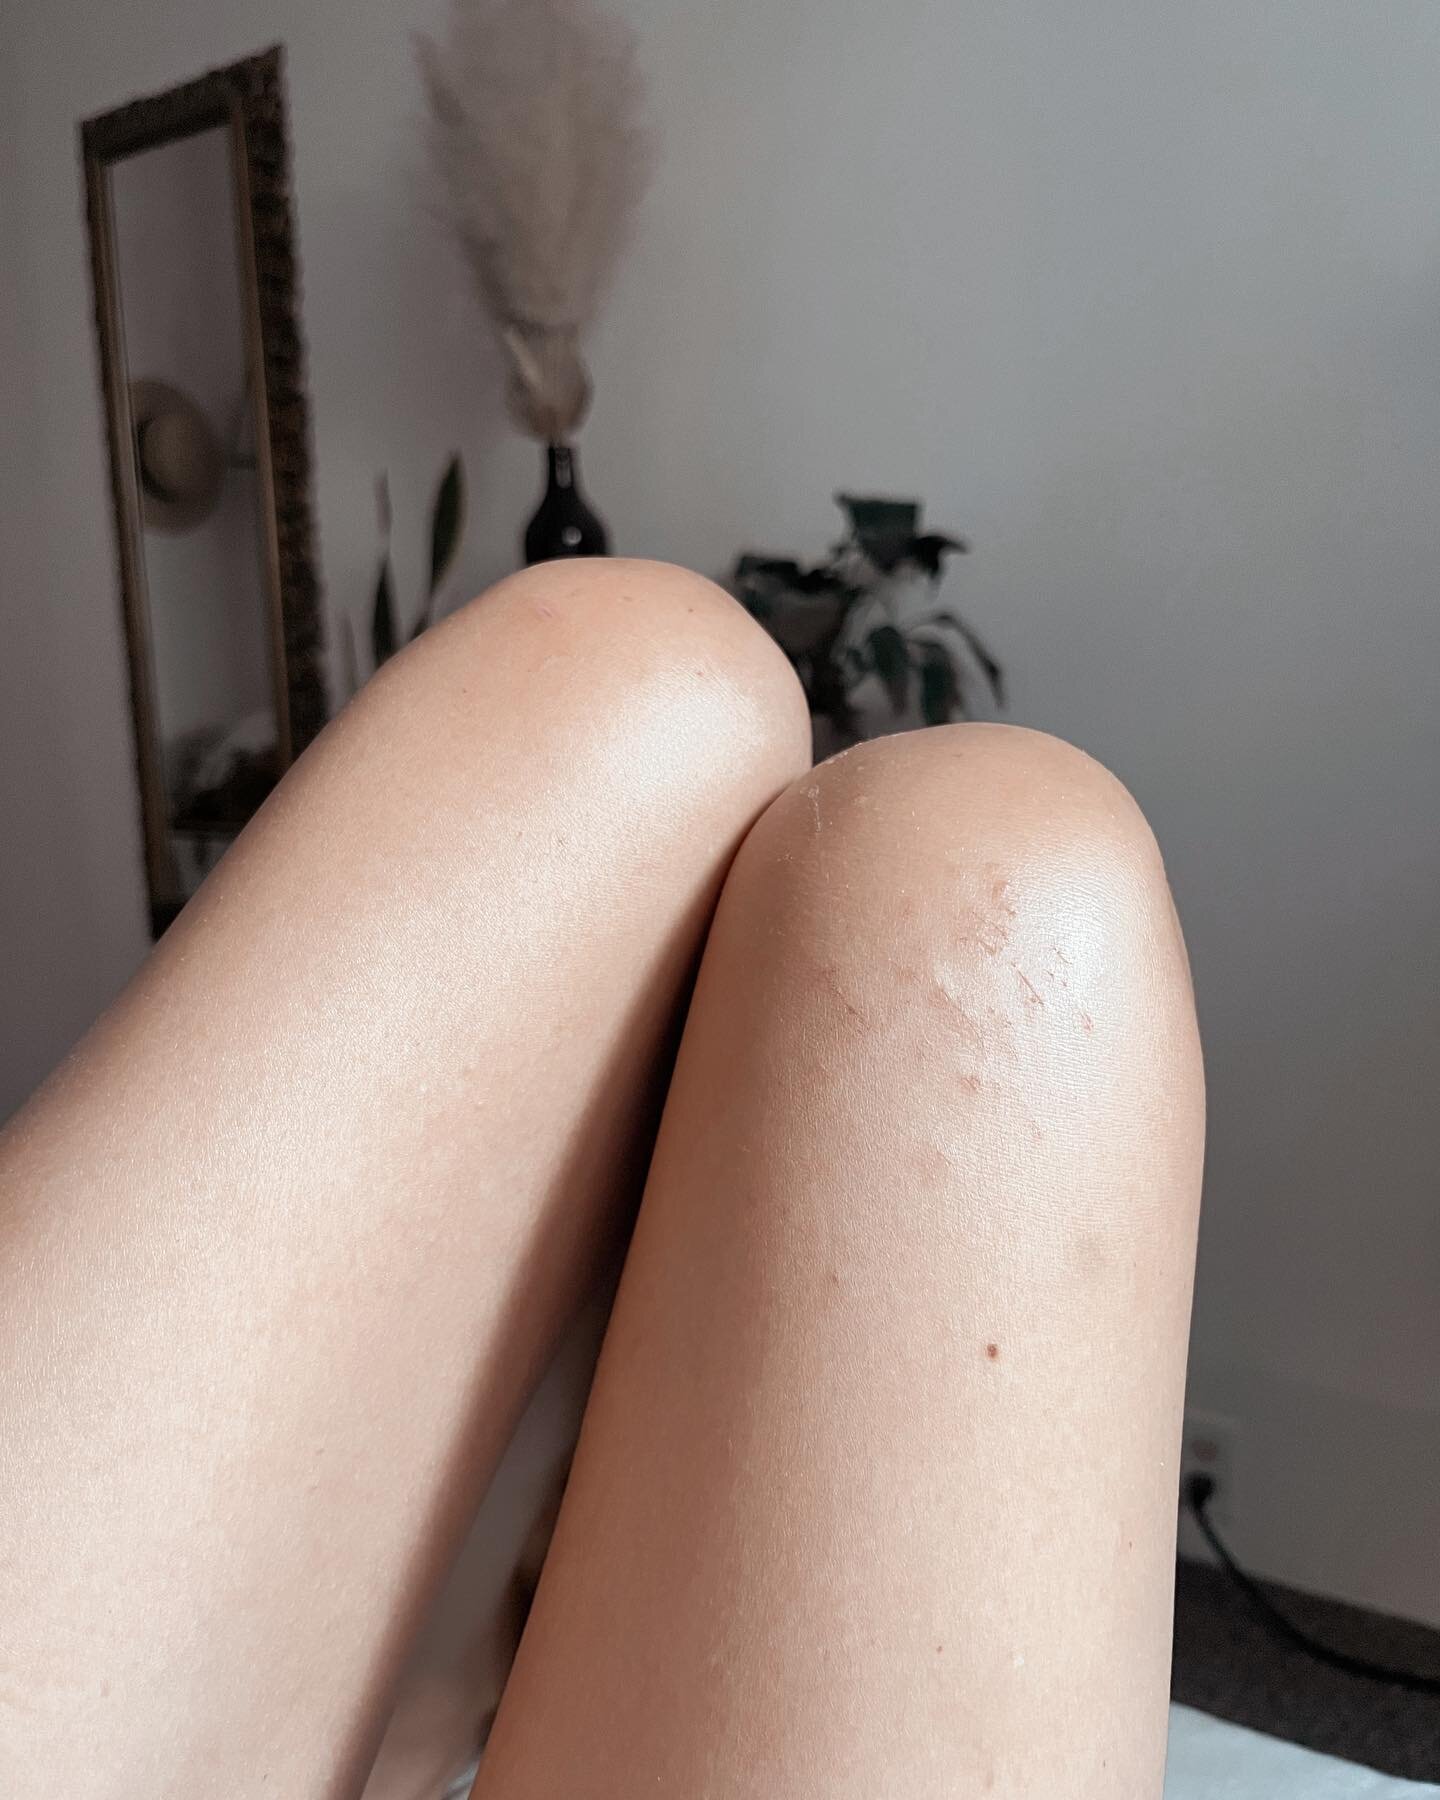 My knees have been in a perma state of being scratched up because I swim in the ocean and the tide throws me around and there are rocks I float over and scrape my skin and it keeps happening and I don&rsquo;t learn my lesson and it&rsquo;s okay becau